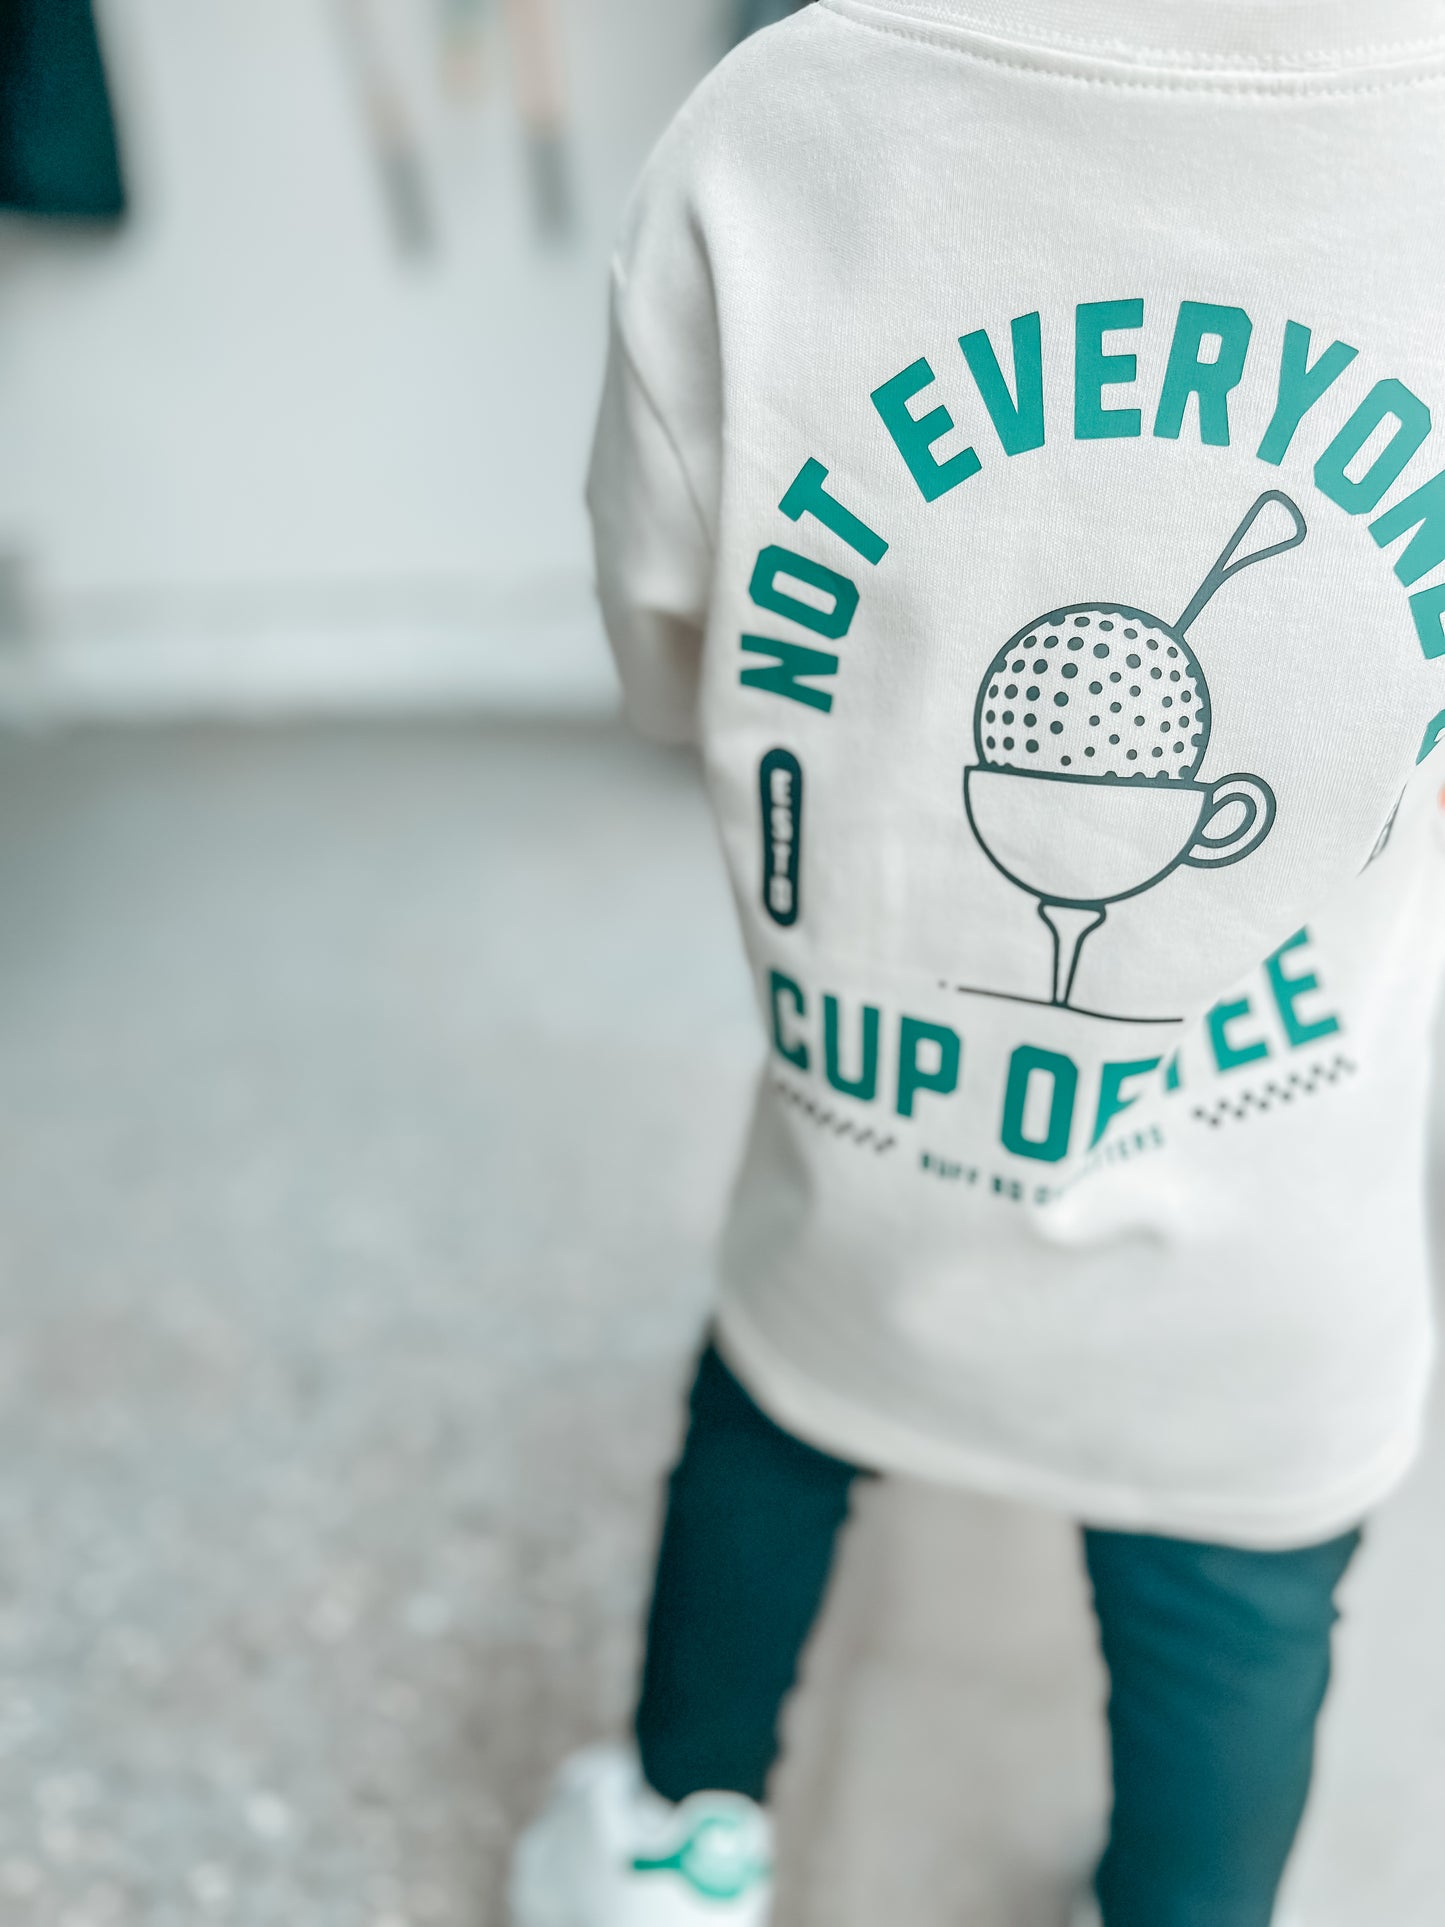 Not Everyone's Cup of Tee Golf Shirt Ultra Soft Kids Toddler Youth T-Shirt